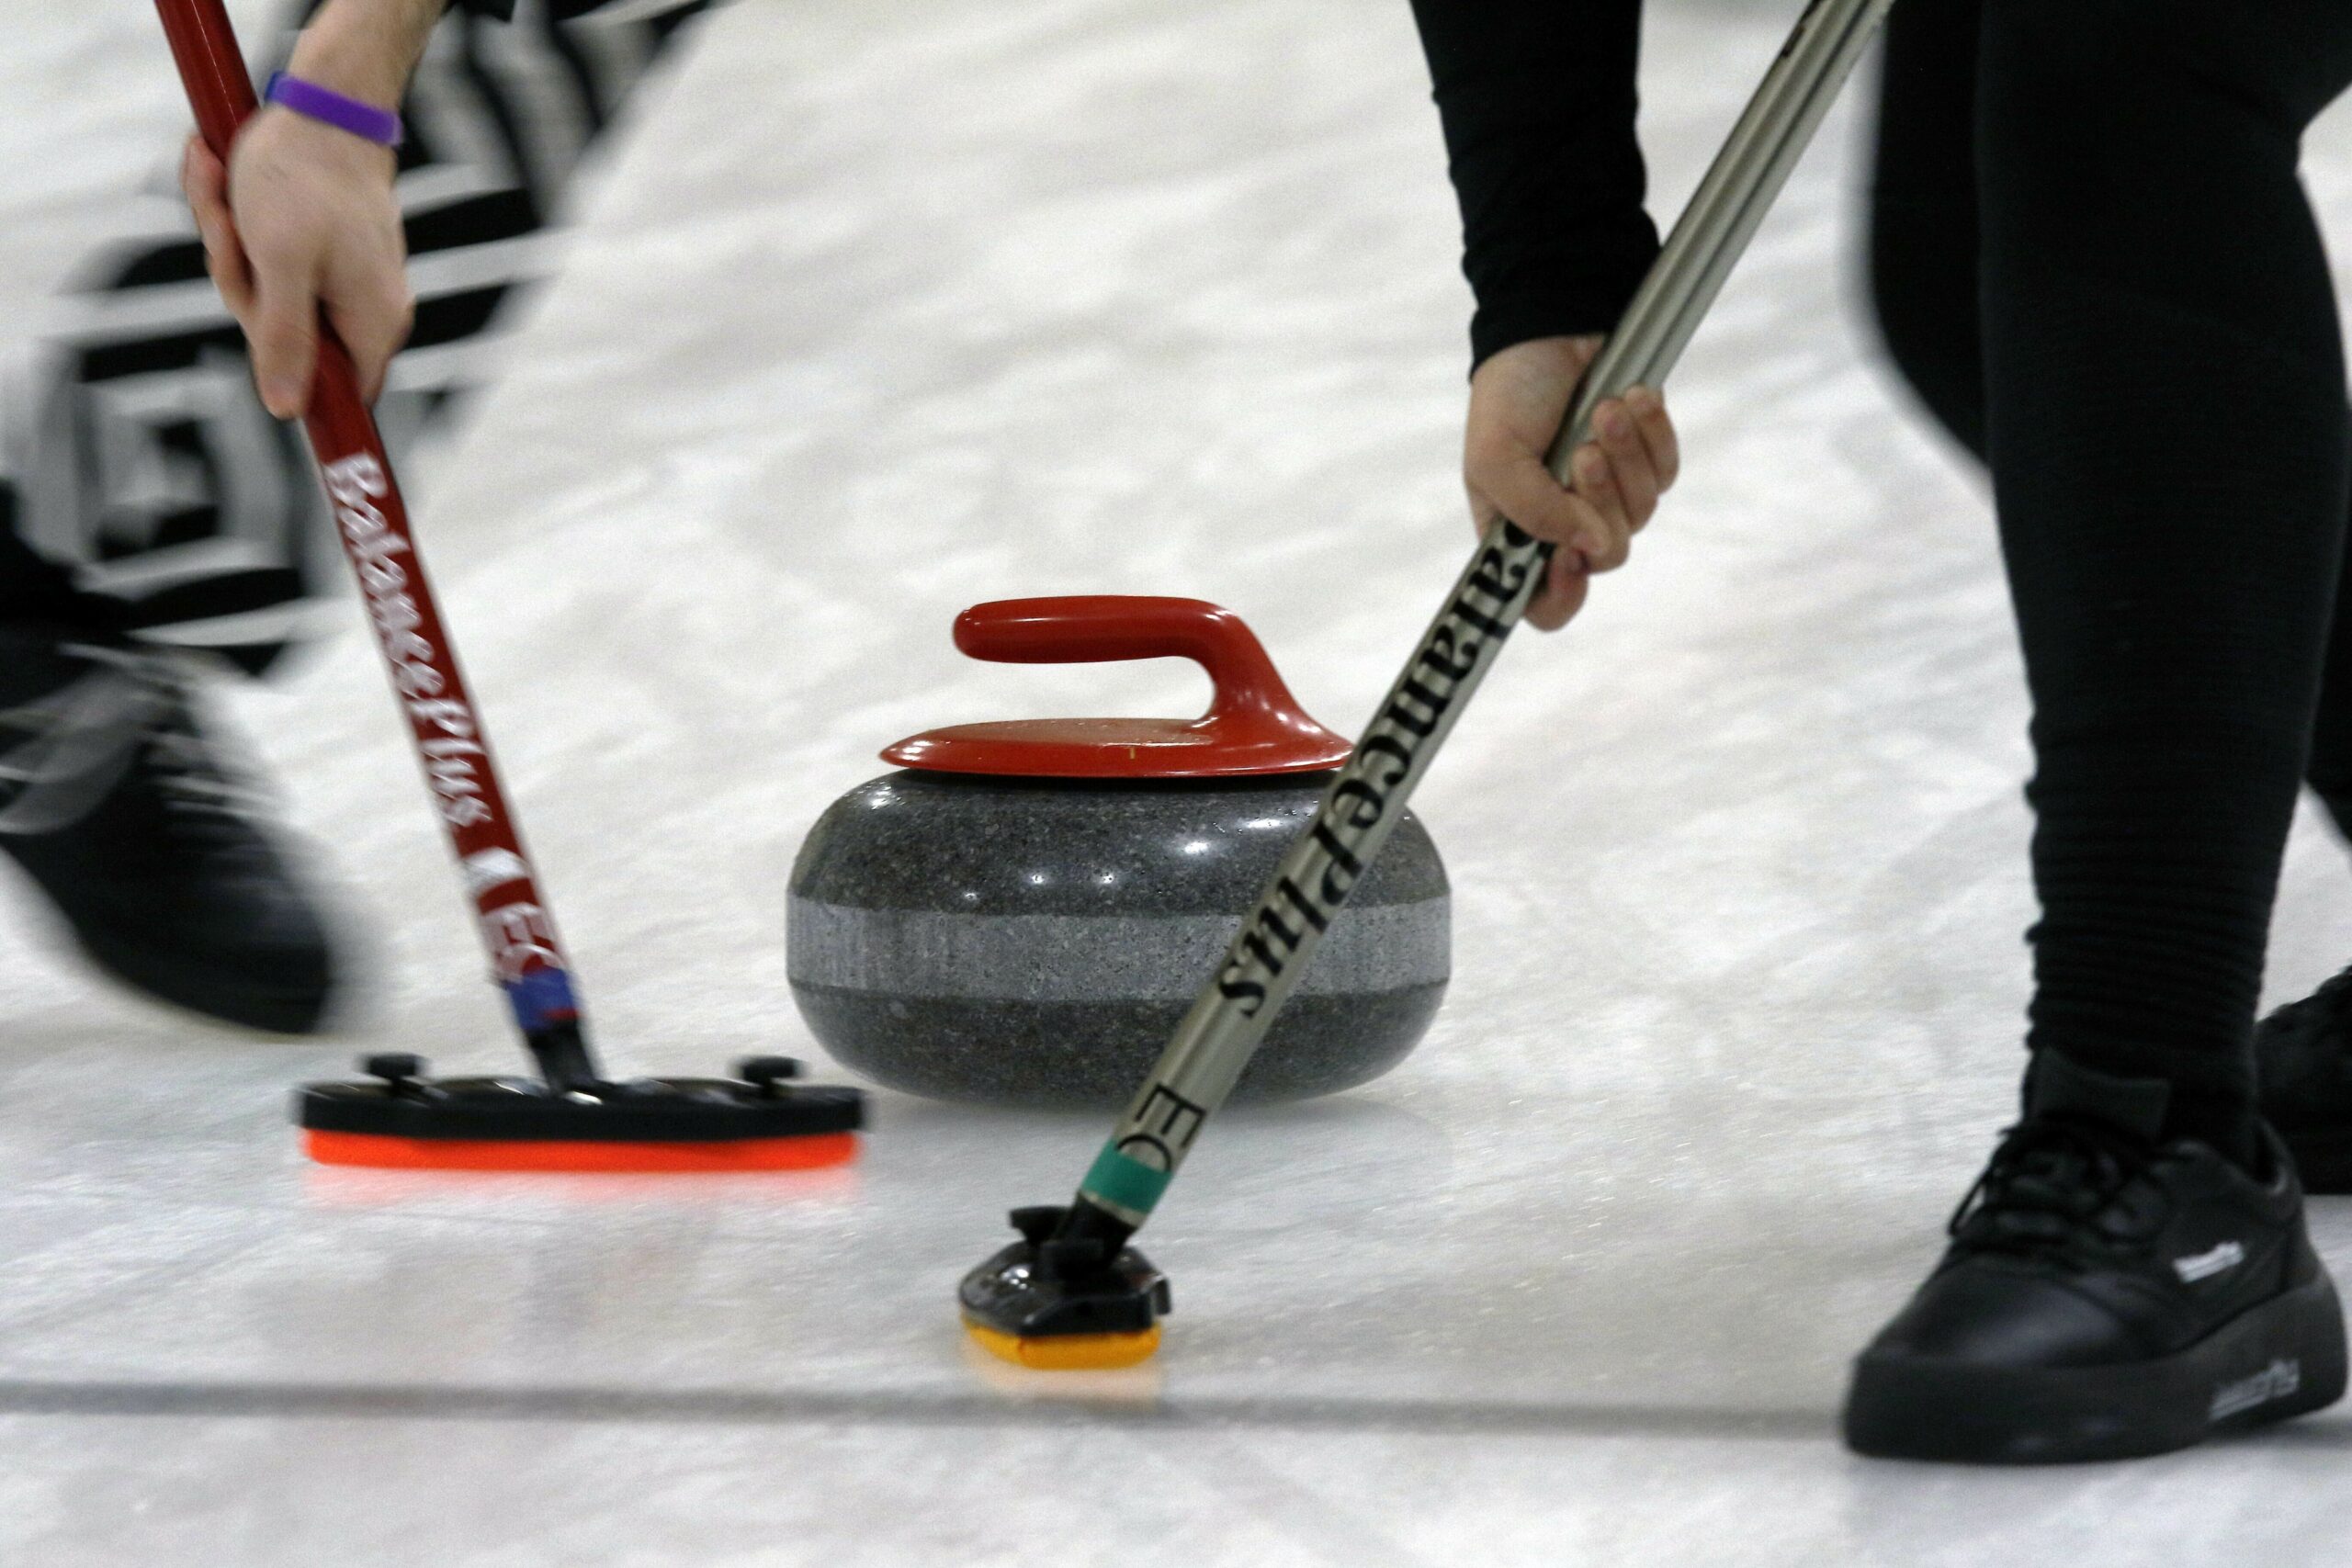 National curling championships come to Wausau this week